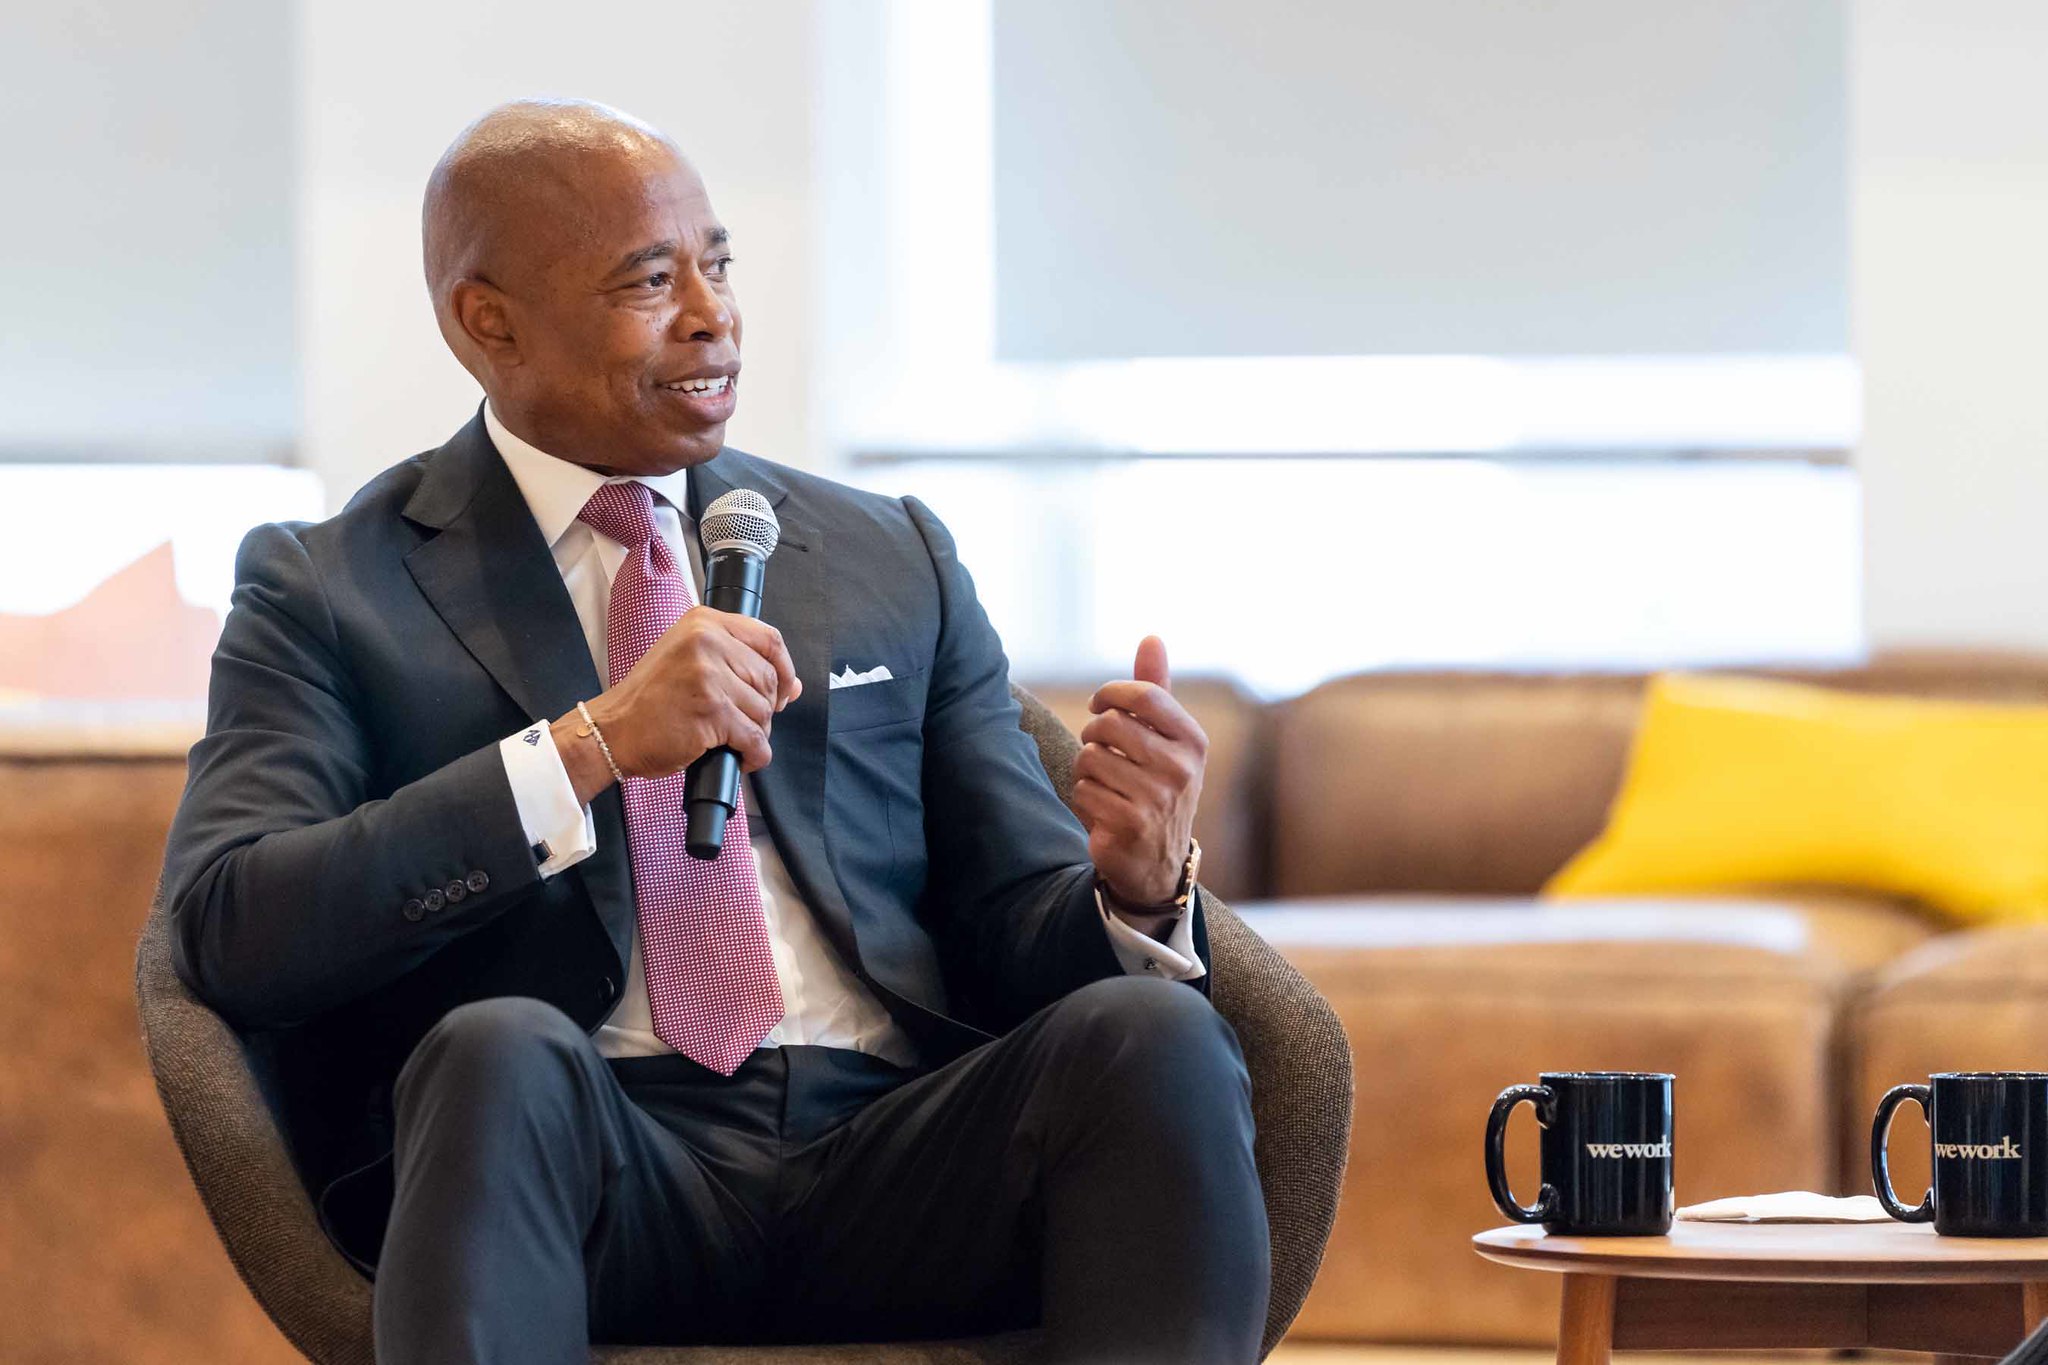 Mayor Eric Adams wears a grey suit and a pinkish tie and holds a microphone while he talks at a conference held at a WeWork.